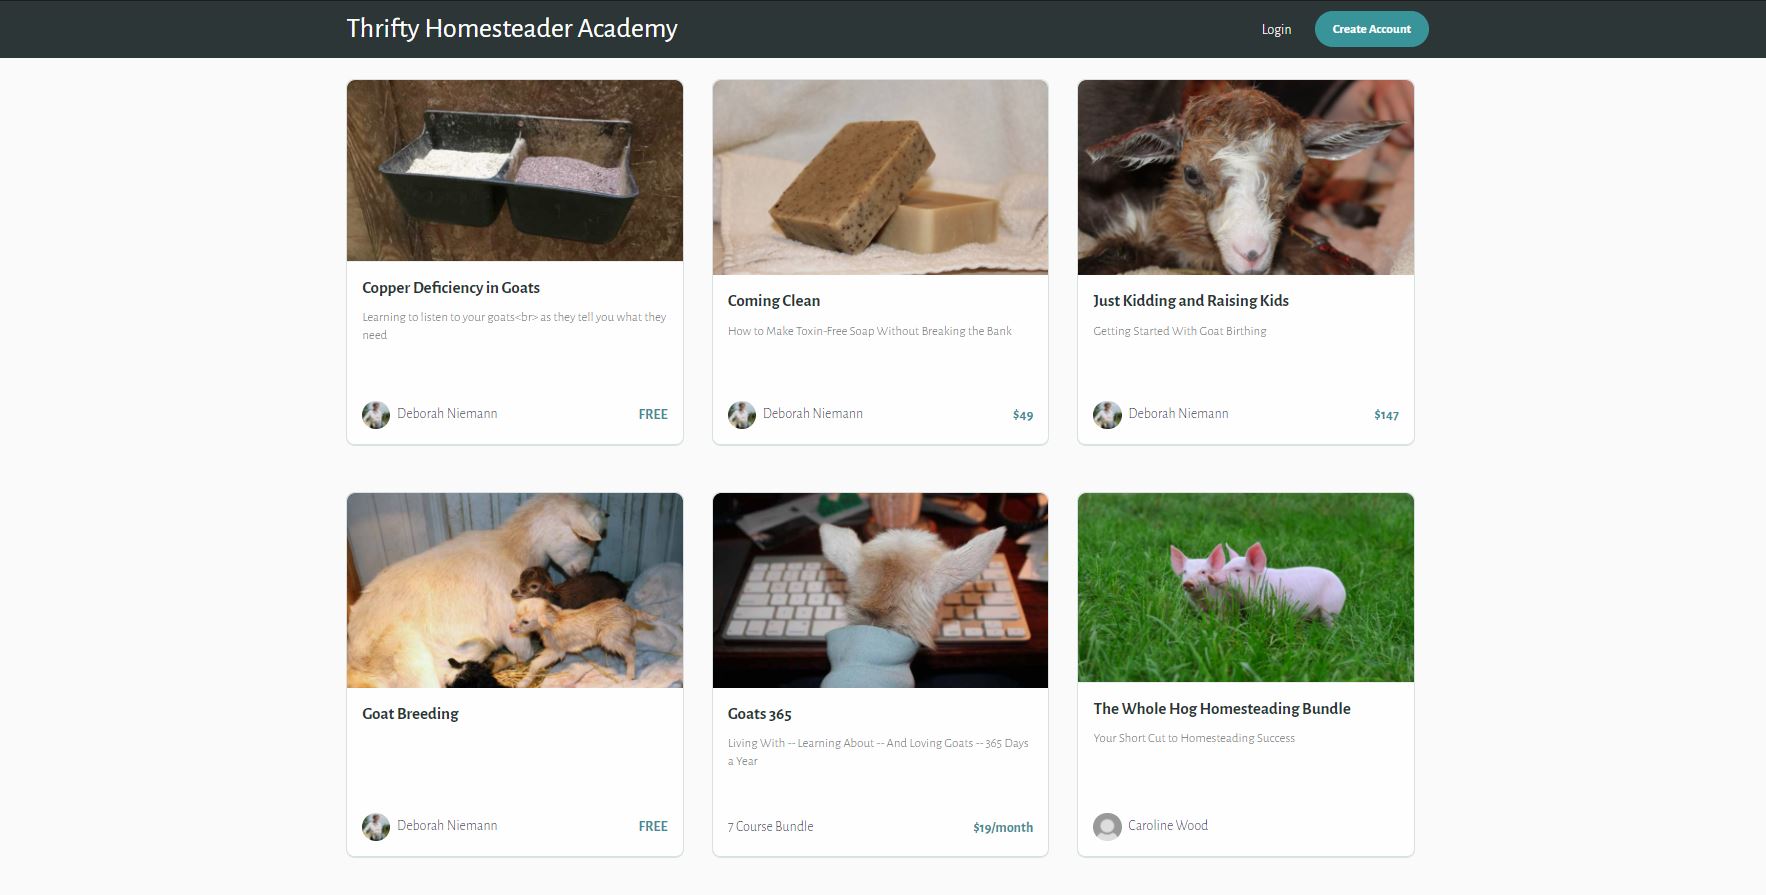 Thrifty Homestead Academy Online Course